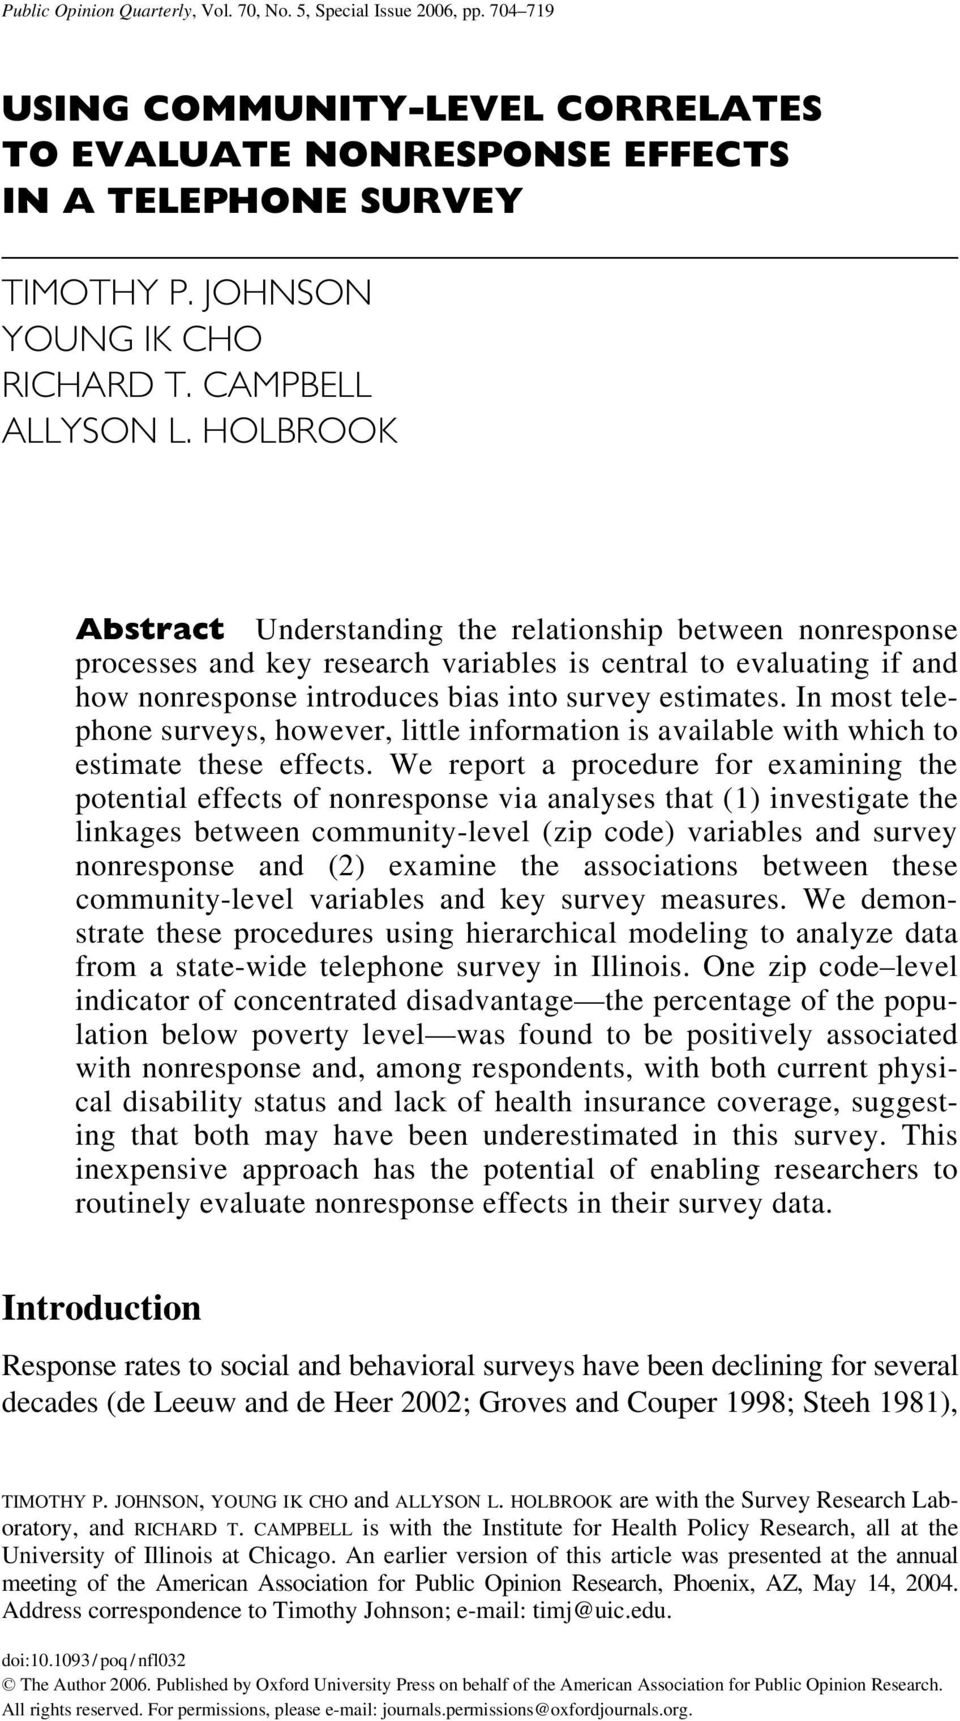 HOLBROOK Abstract Understanding the relationship between nonresponse processes and key research variables is central to evaluating if and how nonresponse introduces bias into survey estimates.